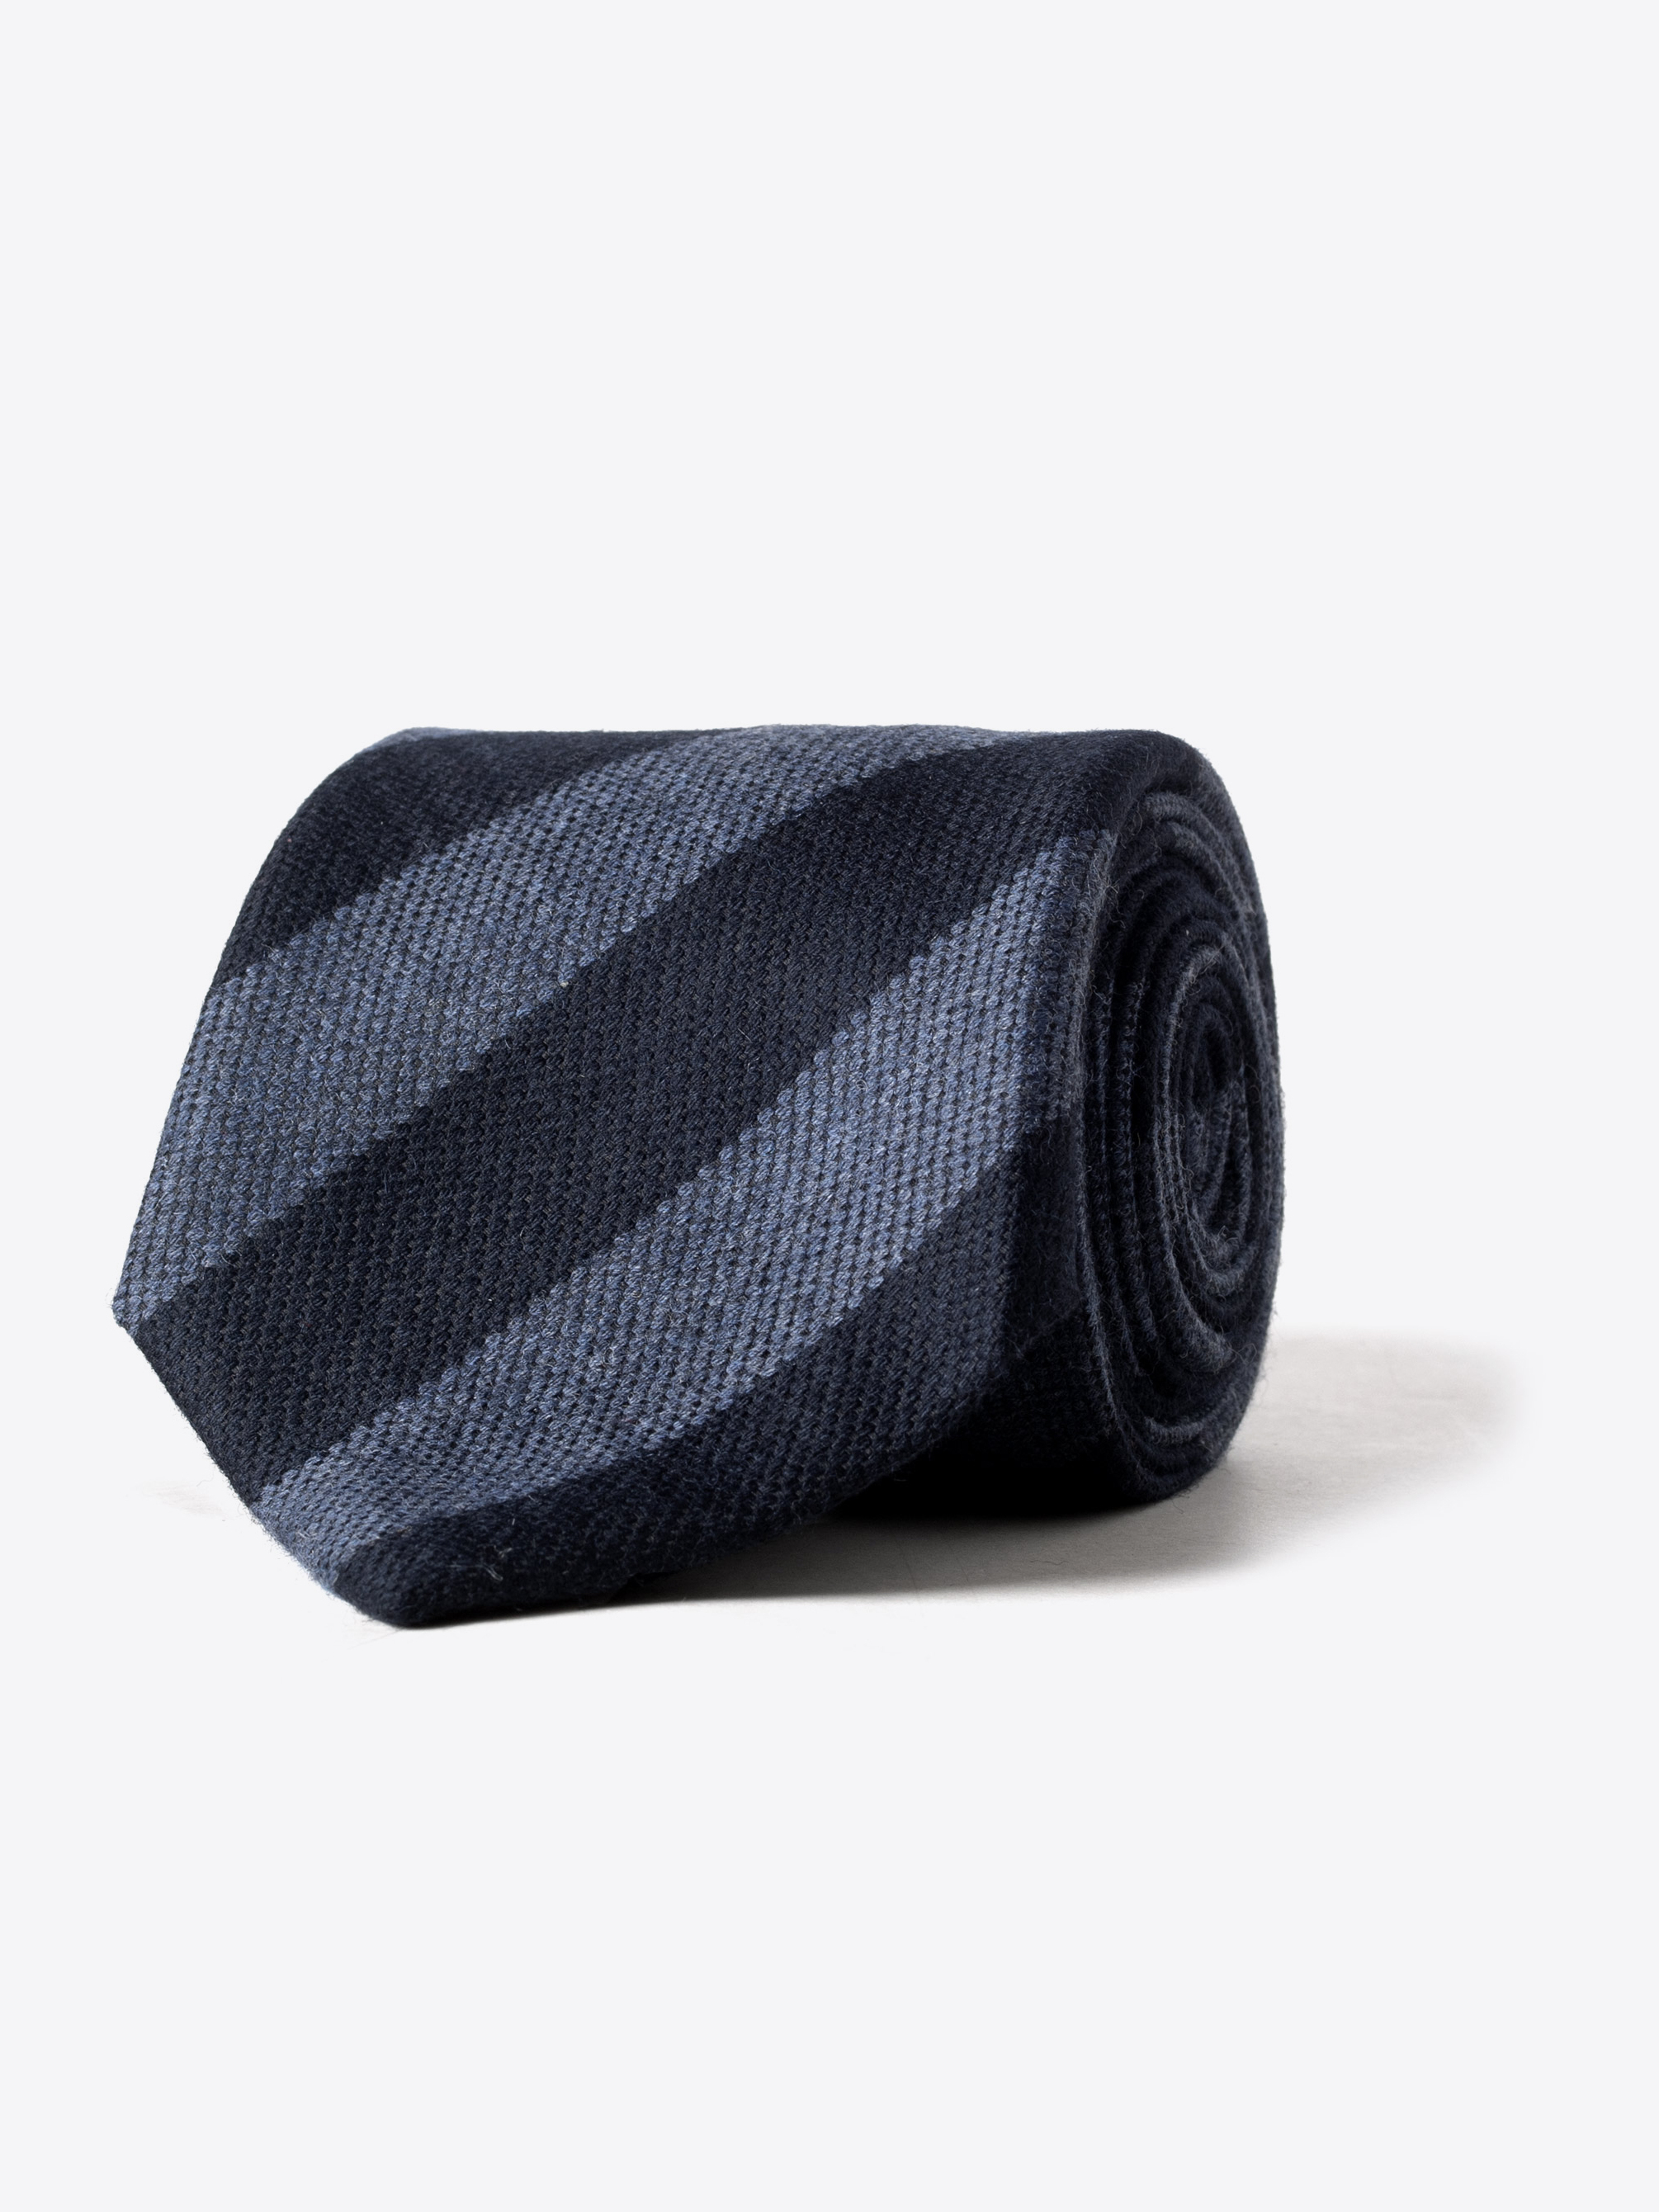 Zoom Image of Navy and Light Blue Wool and Silk Striped Tie